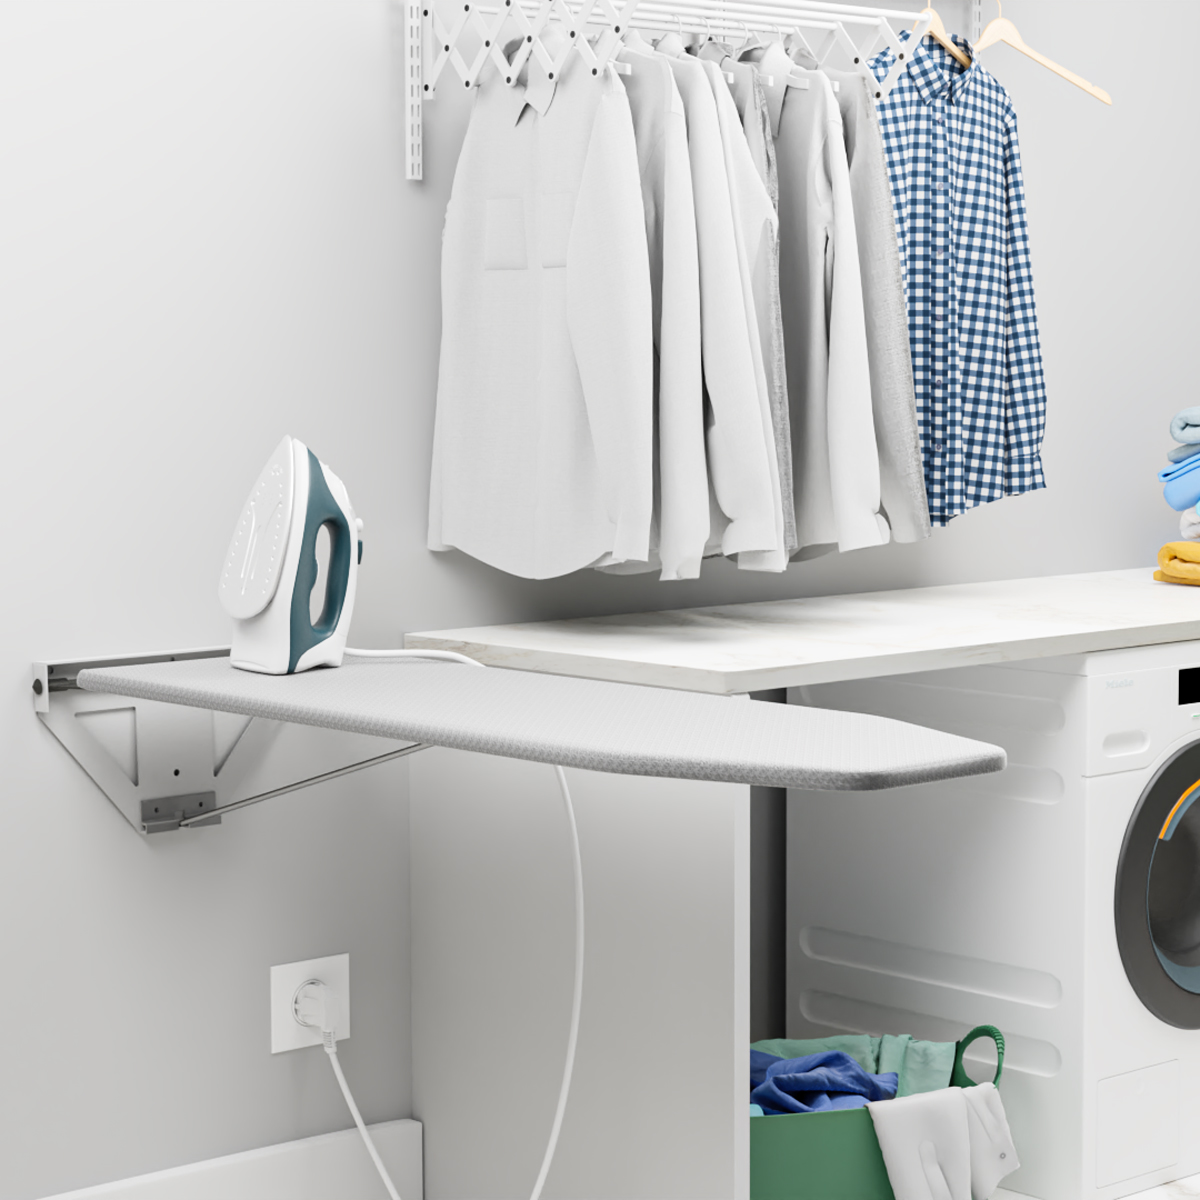 Details about   Folding Hidden Wall-Mounted Ironing Board for Laundry Room Space Saving 180° 